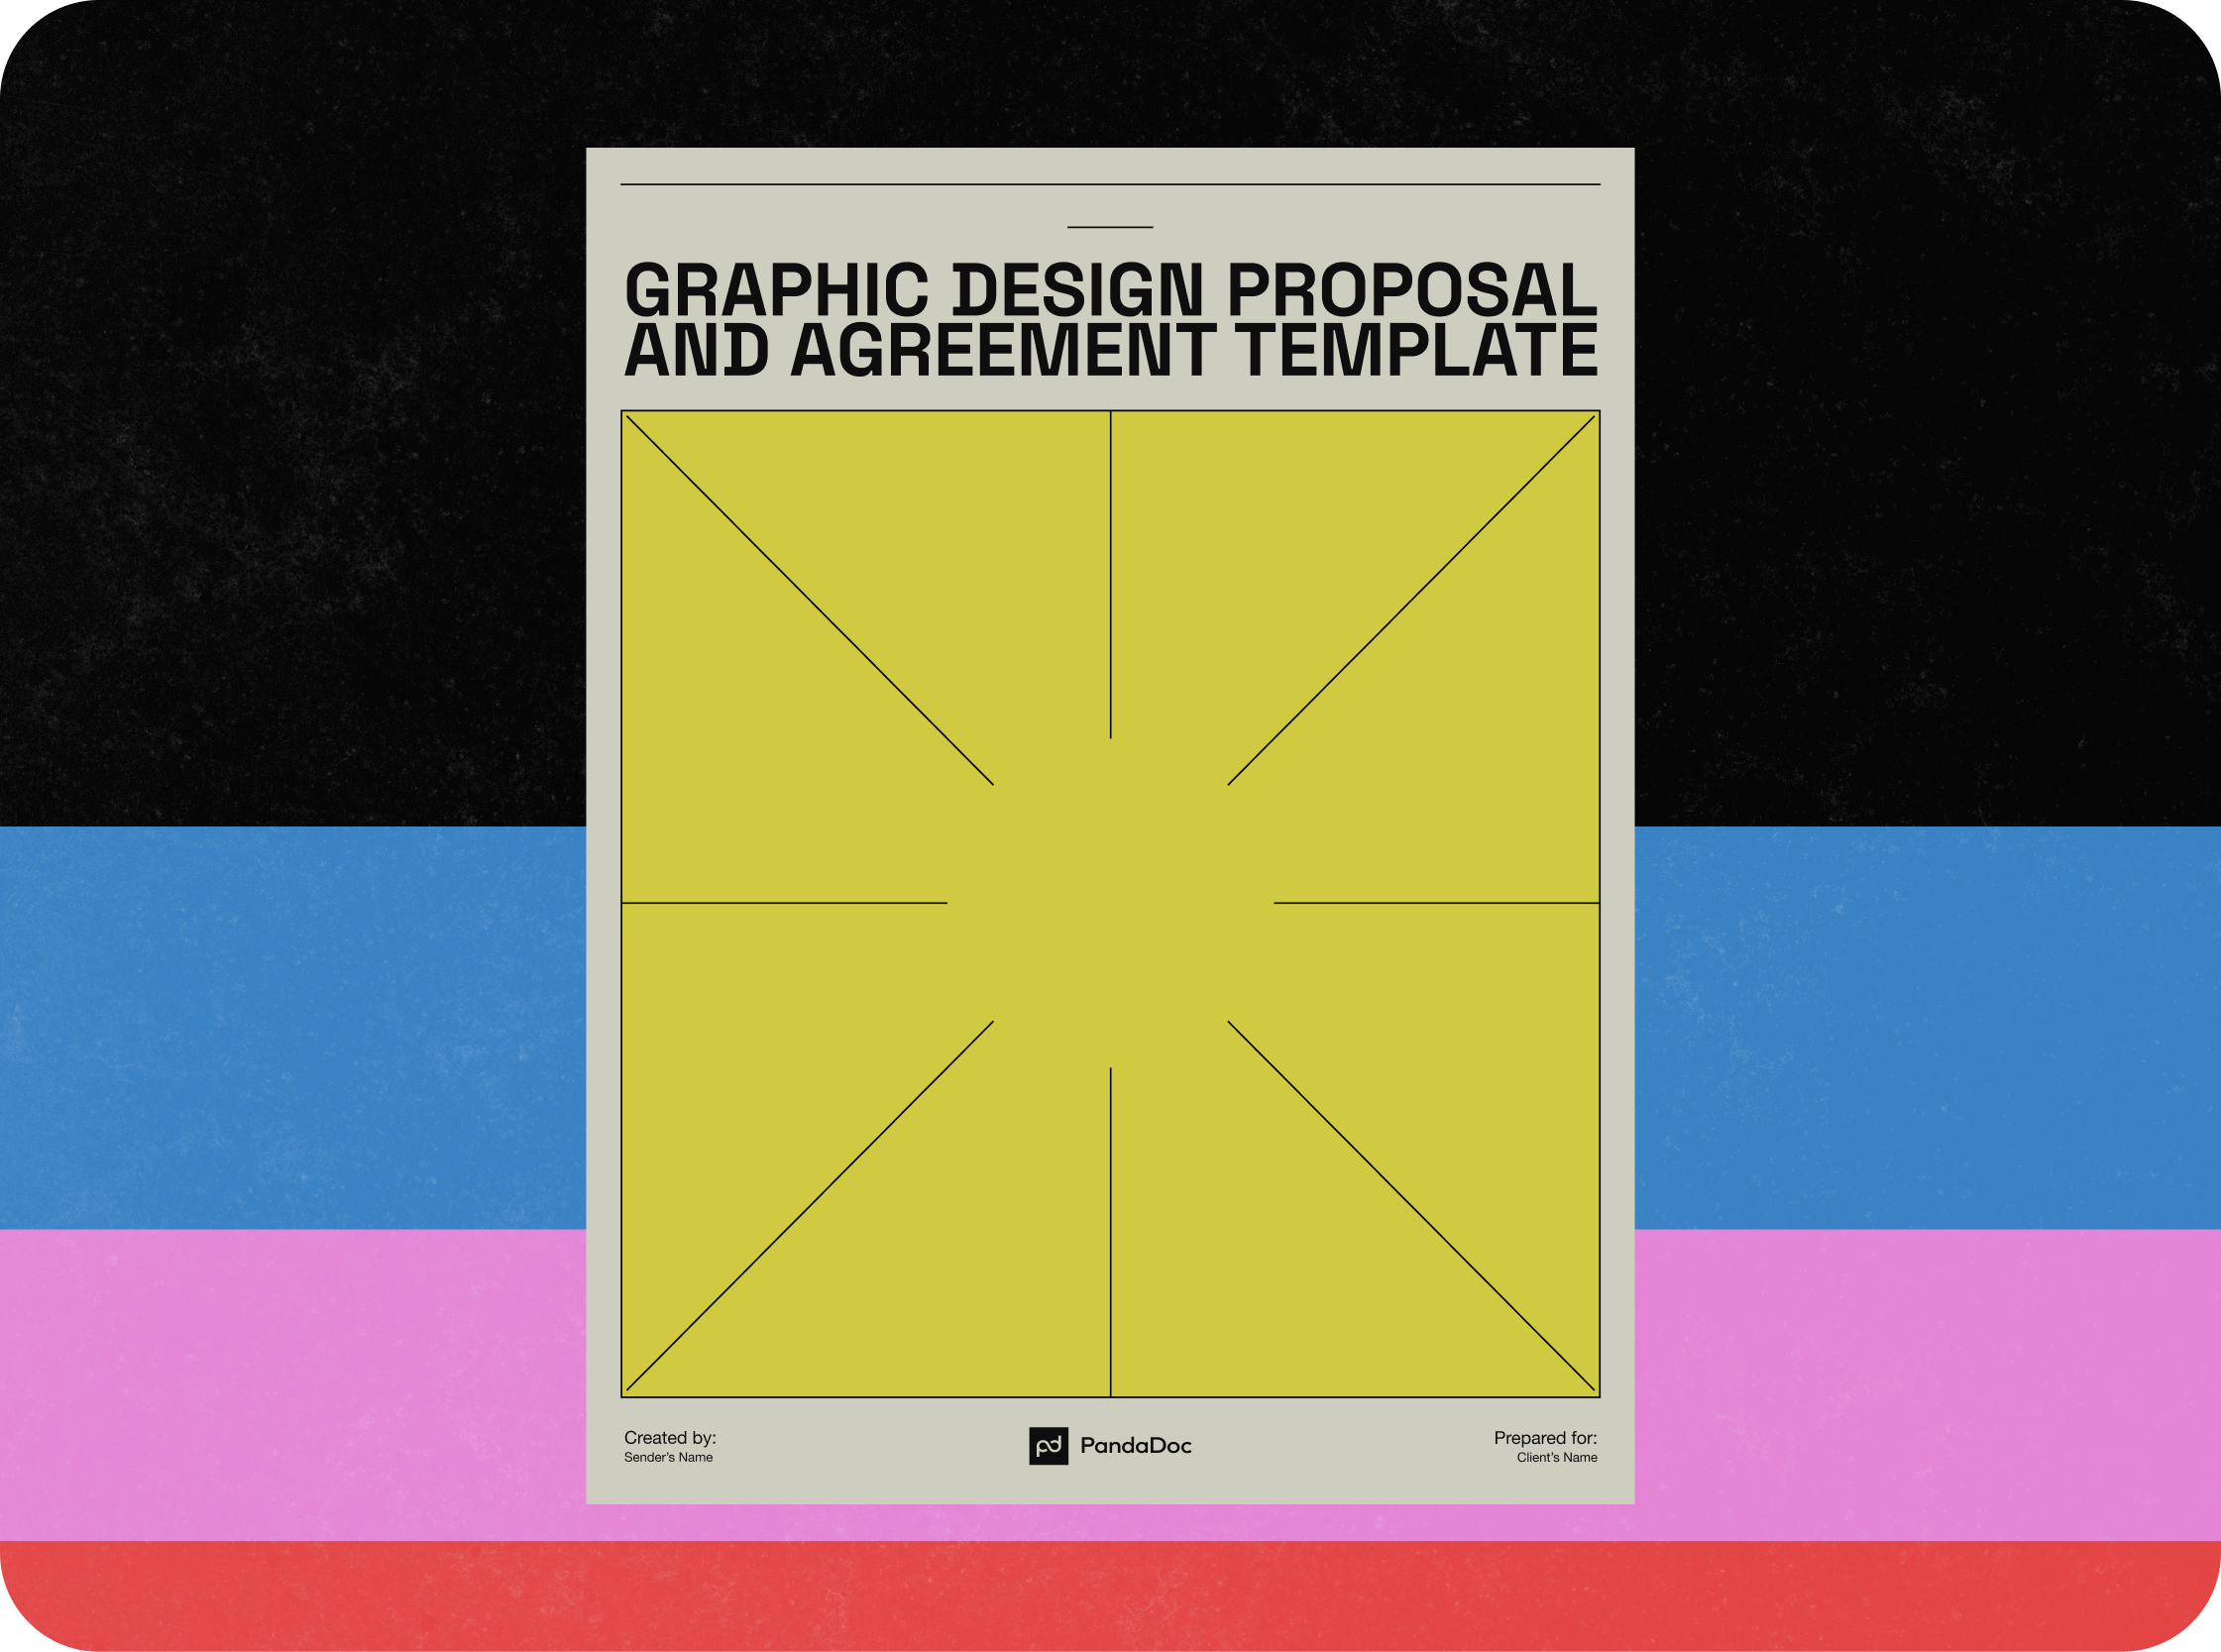 Graphic Design Proposal and Agreement Template PandaDoc